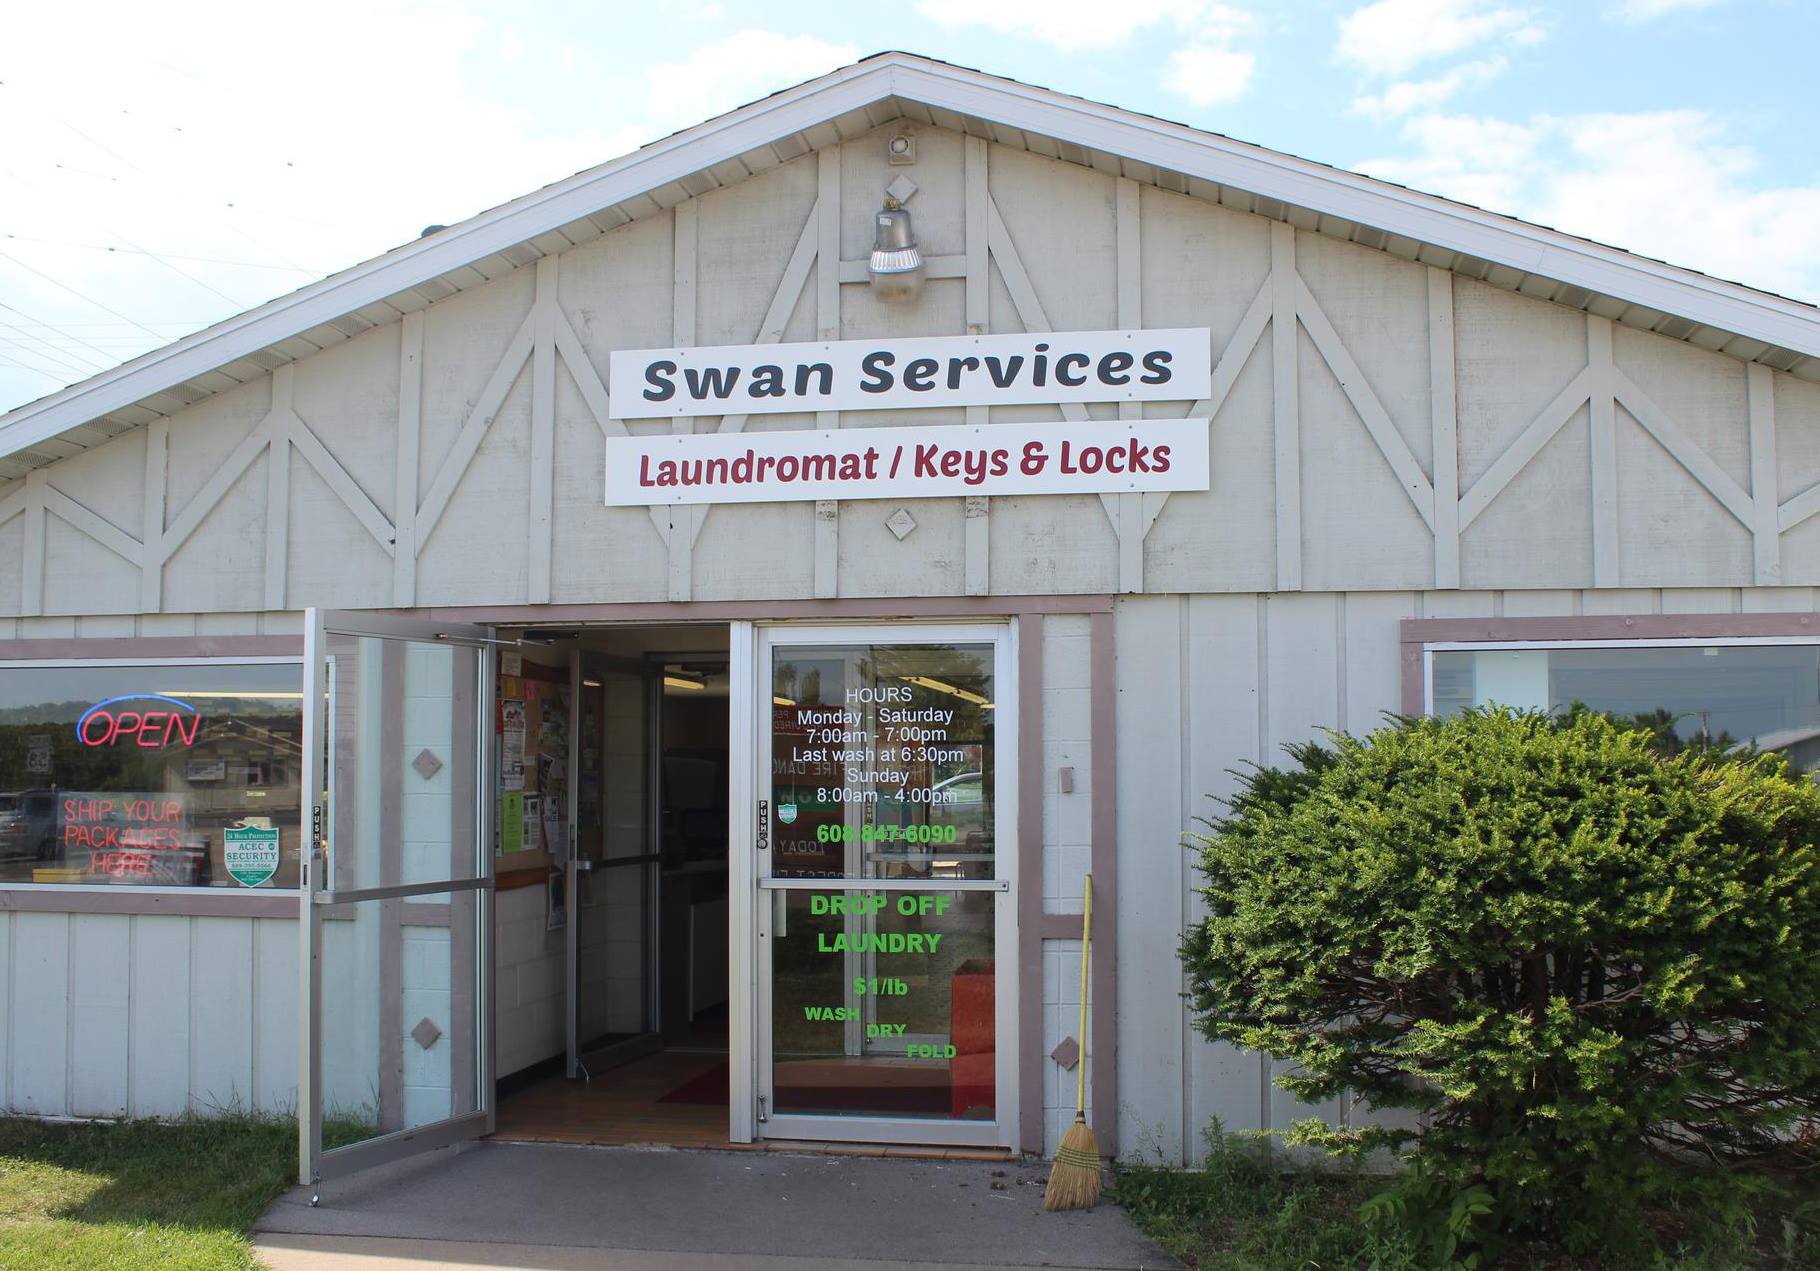 SWAN SERVICES 603 N Union St, Mauston Wisconsin 53948